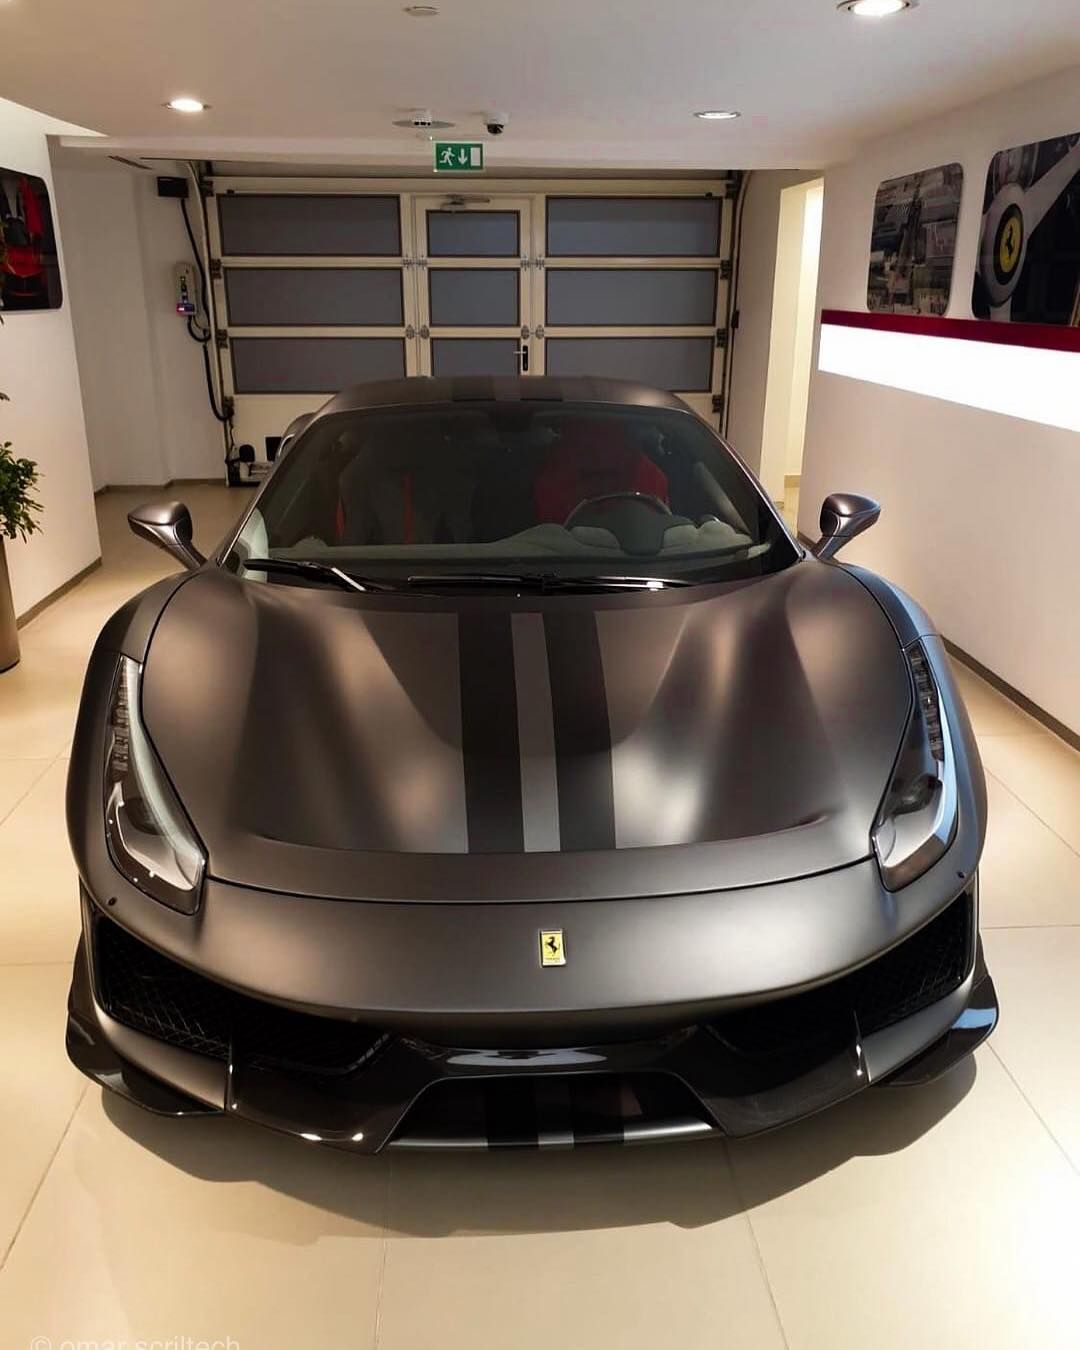 Searching for a quality luxury cars and truck will undoubtedly bring anyone to the rather apt adjective, “exotic”. Ferrari 488, Exotic Sports Cars, Exotic Cars, Super Sport Cars, Super Cars, Liberty Walk Cars, Top Luxury Cars, F12 Berlinetta, Automobile